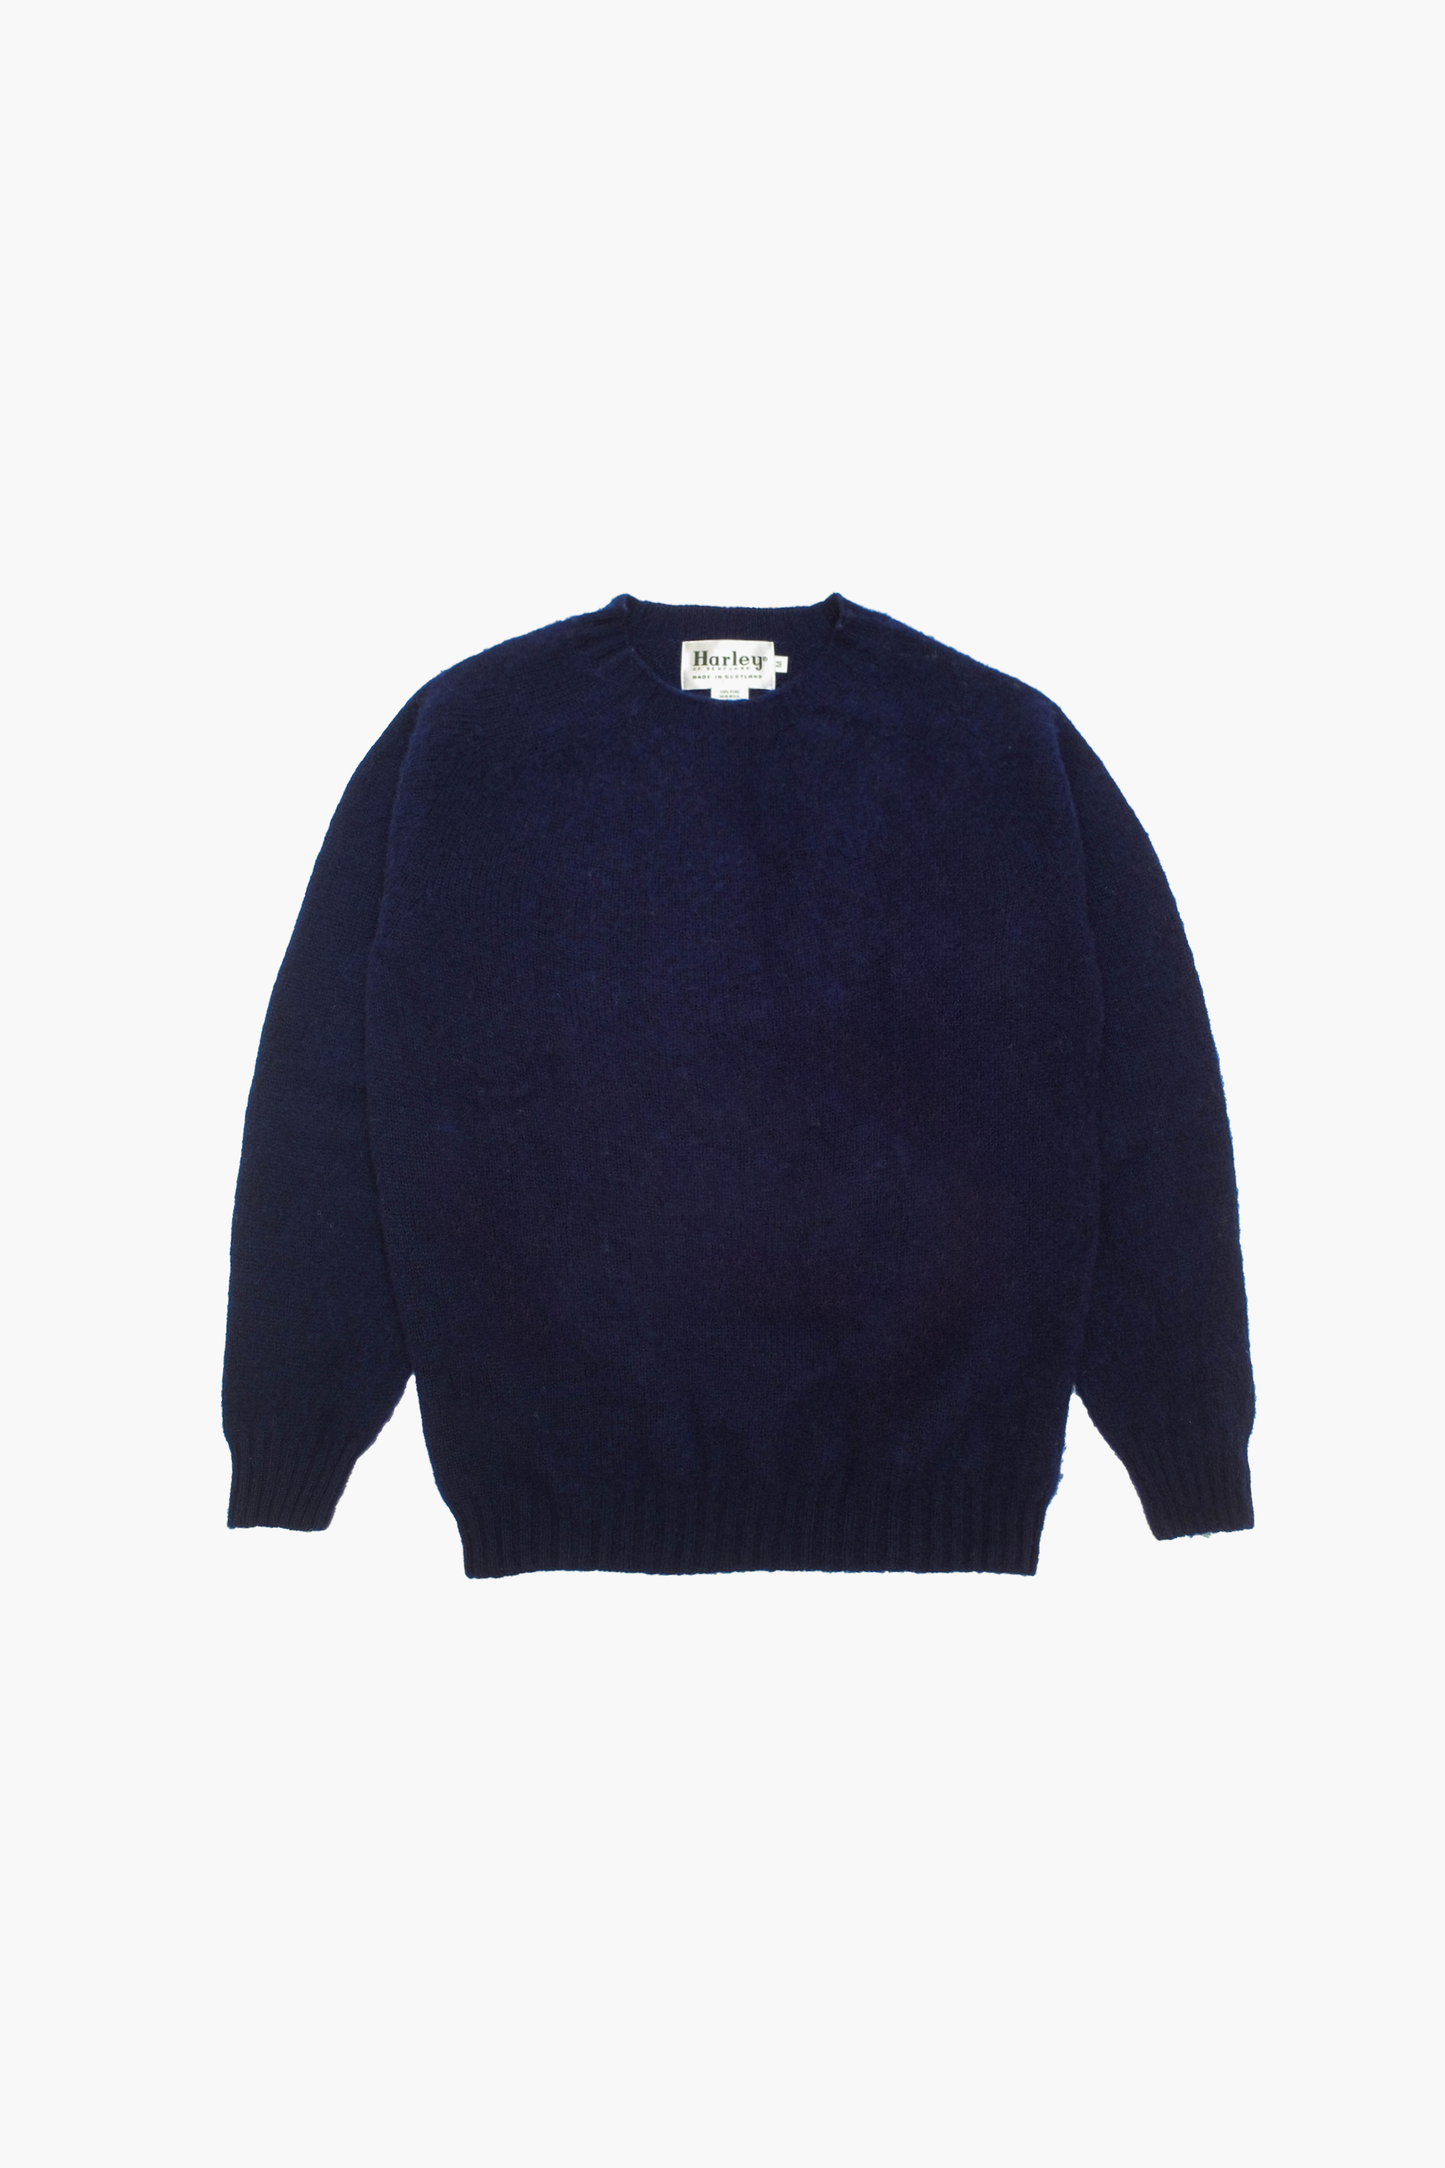 Shaggy Dog sweater in navy blue wool